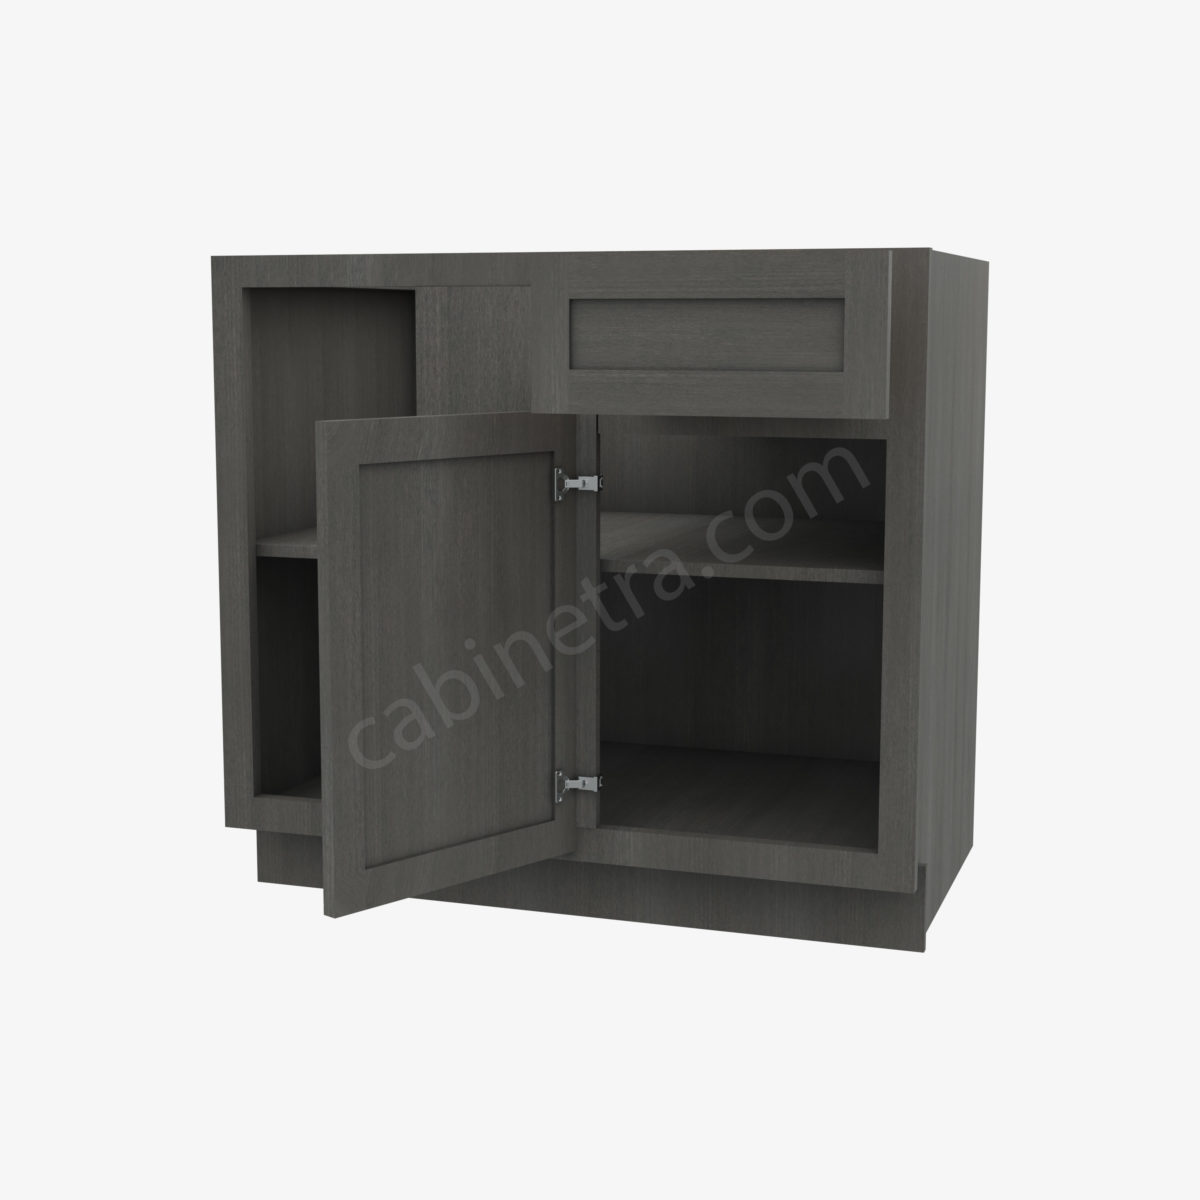 AG BBLC39 42 36W 5 Forevermark Greystone Shaker Cabinetra scaled